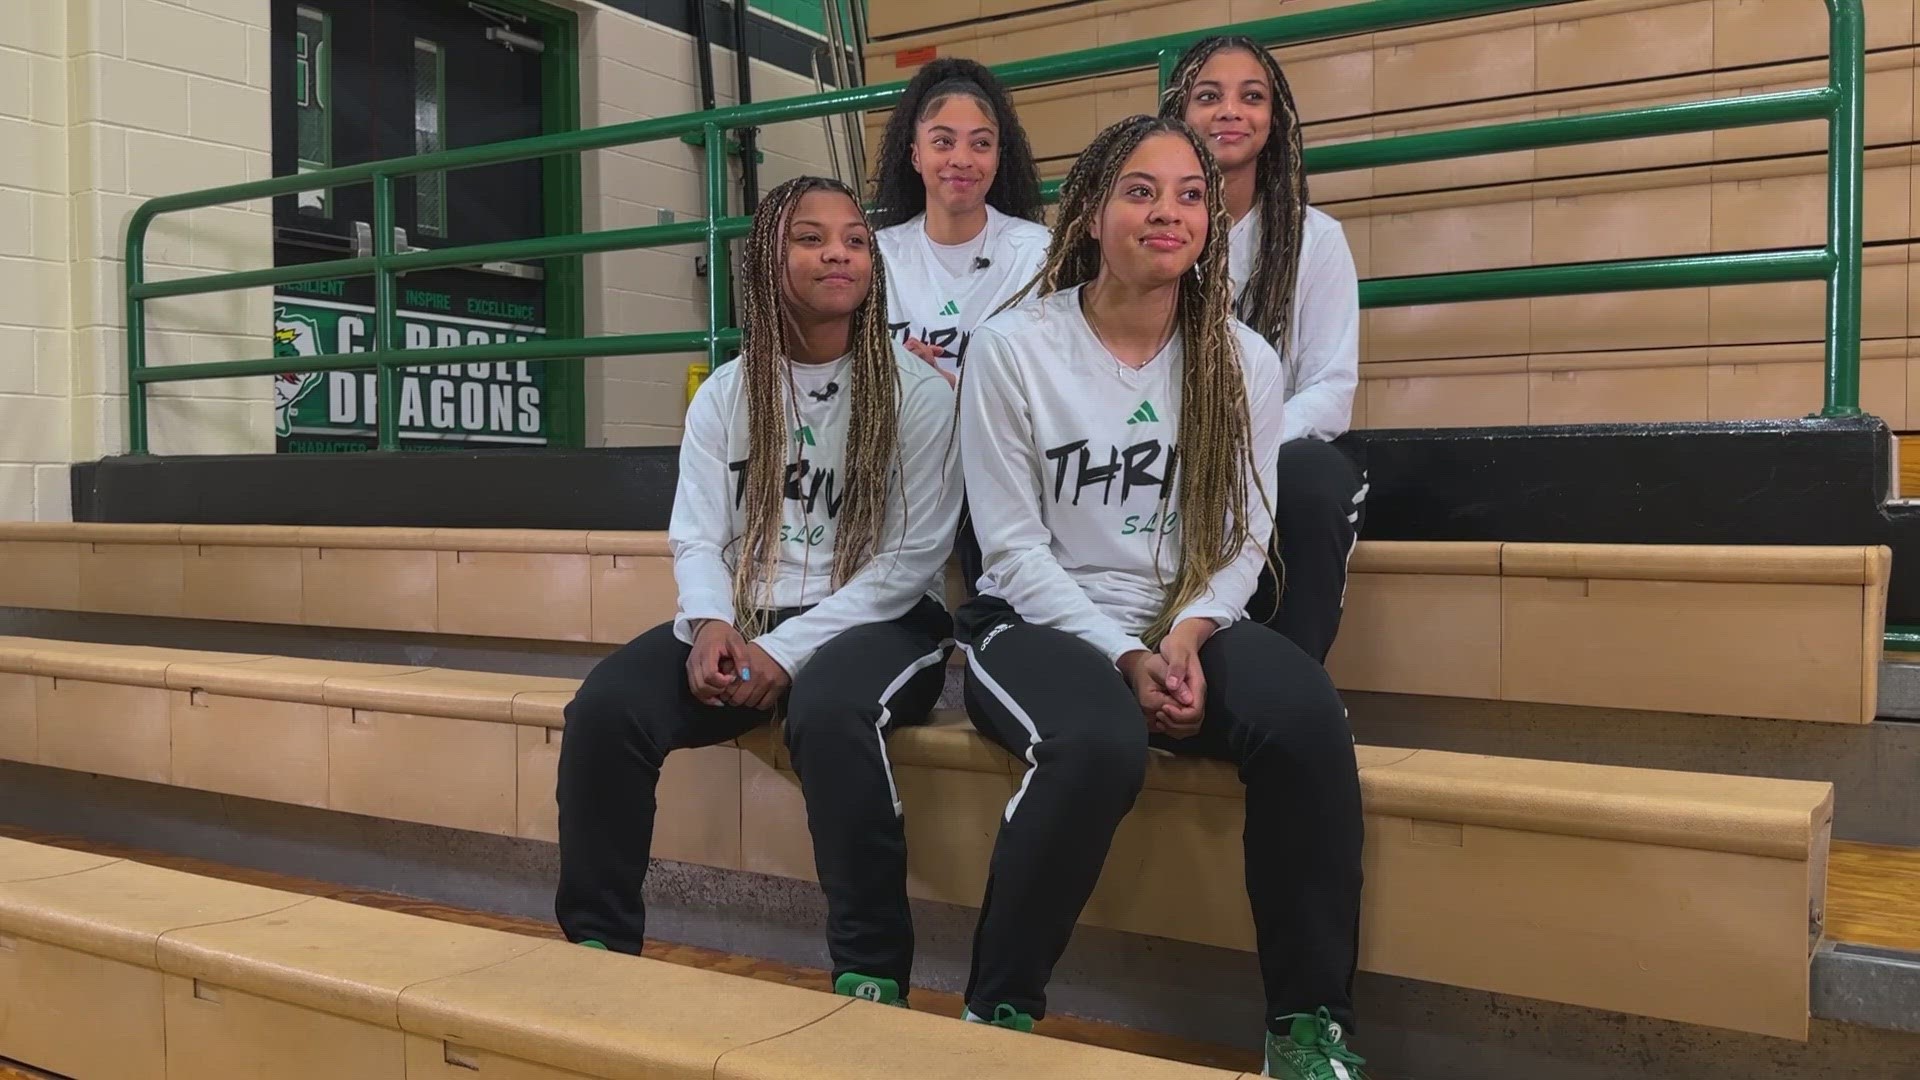 "We can beat a lot of teams because of our chemistry," said Nadia, a freshman guard. All four sisters start for the Southlake Carroll Dragons girl's varsity team.